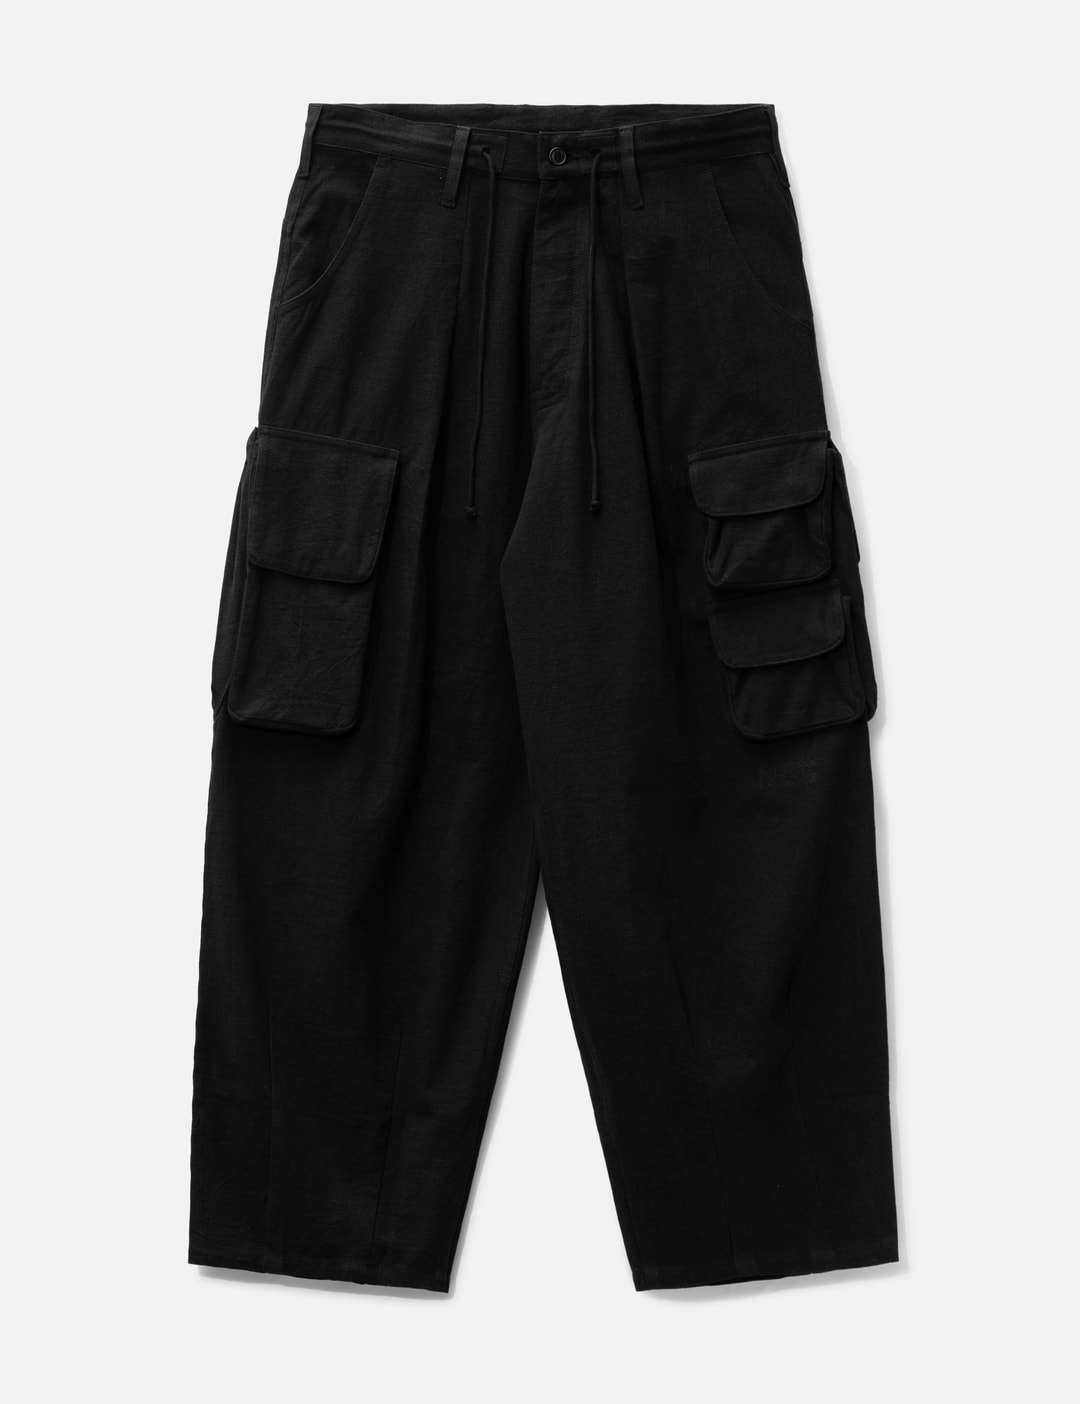 Story Mfg - FORAGER PANTS | HBX - Globally Curated Fashion and ...